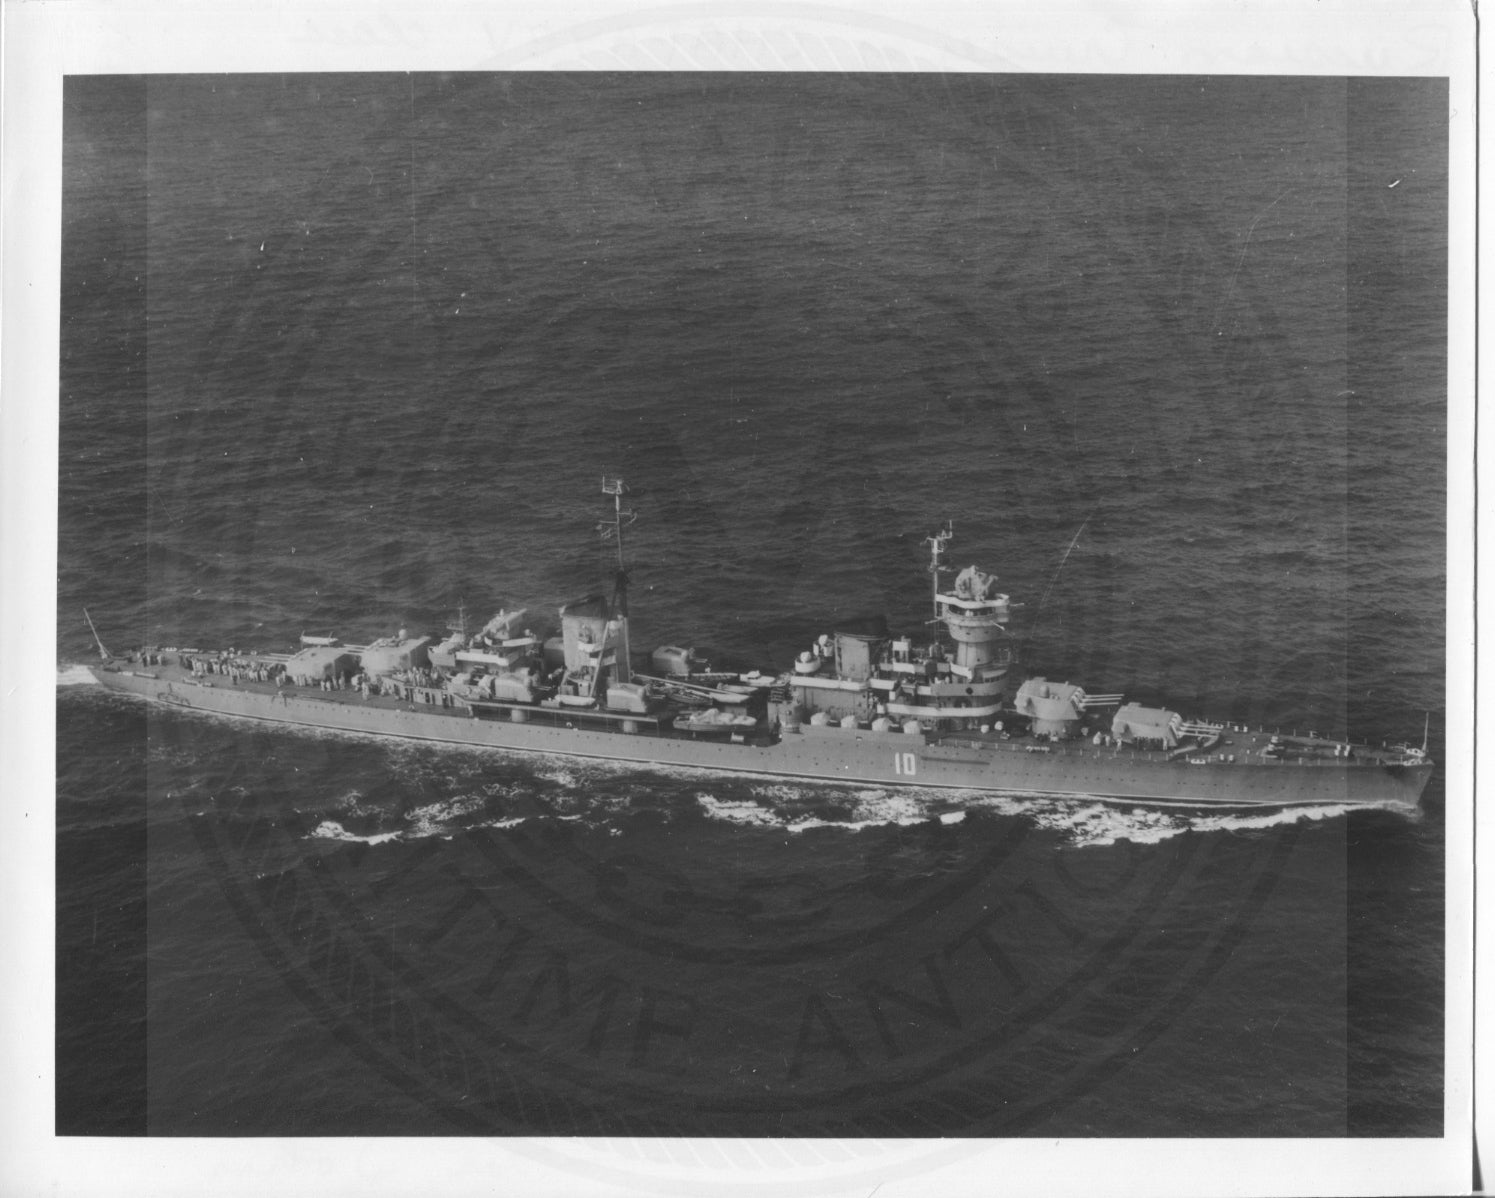 Official U.S. Navy photo the Soviet missile cruiser Chapayev class - Annapolis Maritime Antiques